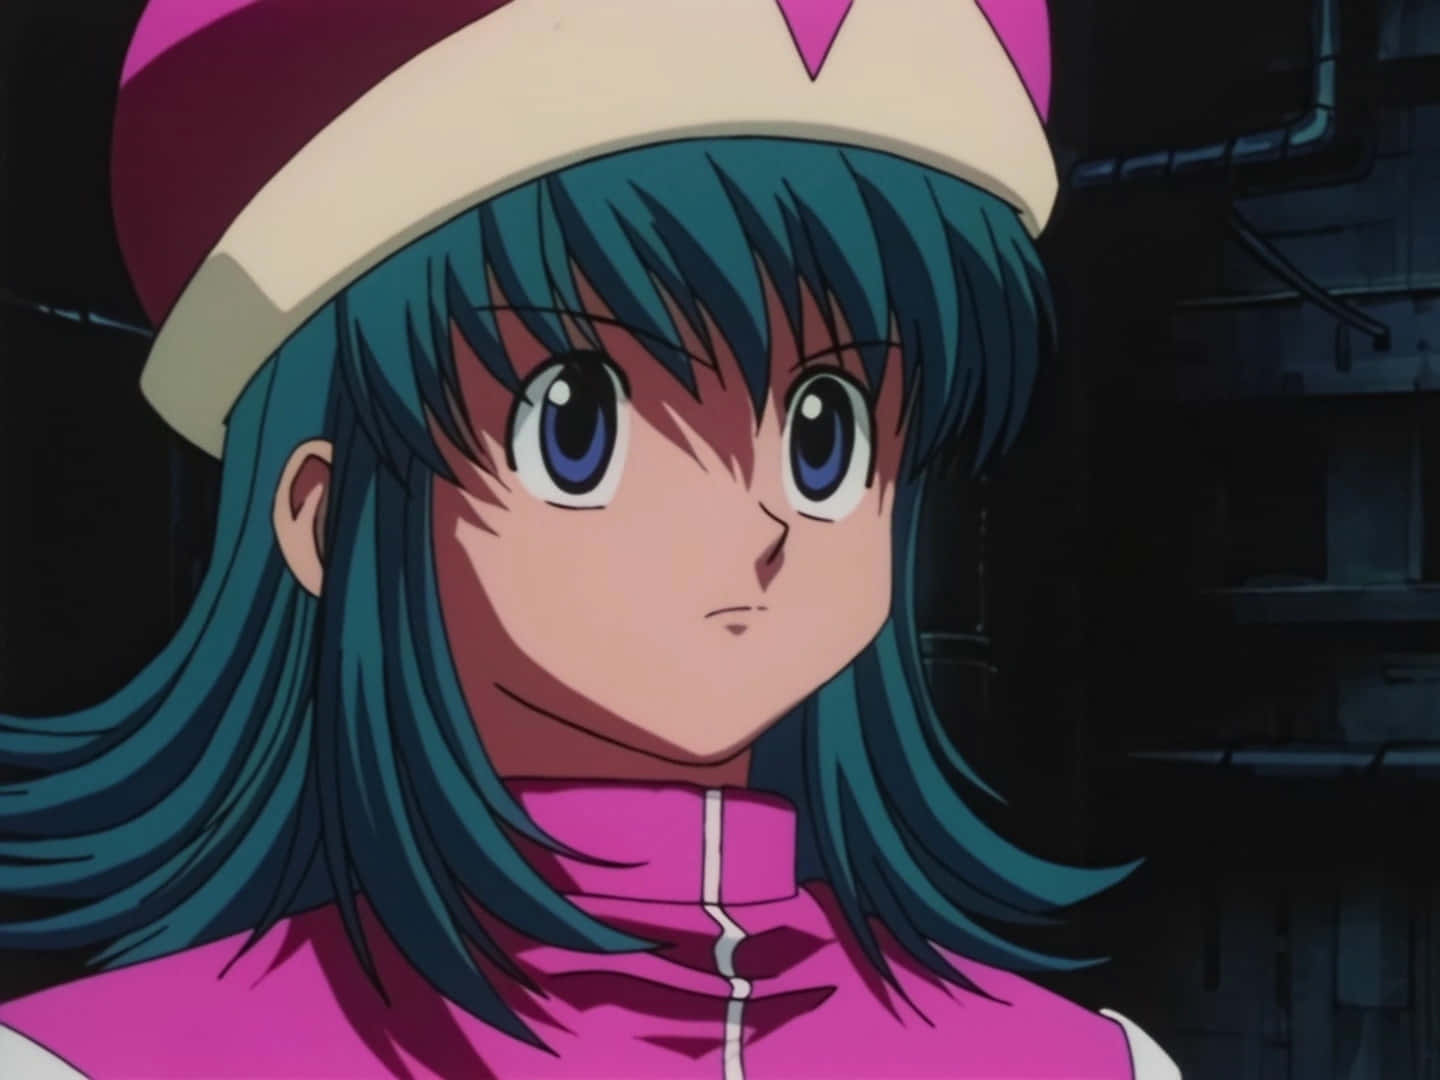 Ponzu, a skilled chemist from Hunter x Hunter, in her signature hat and outfit. Wallpaper